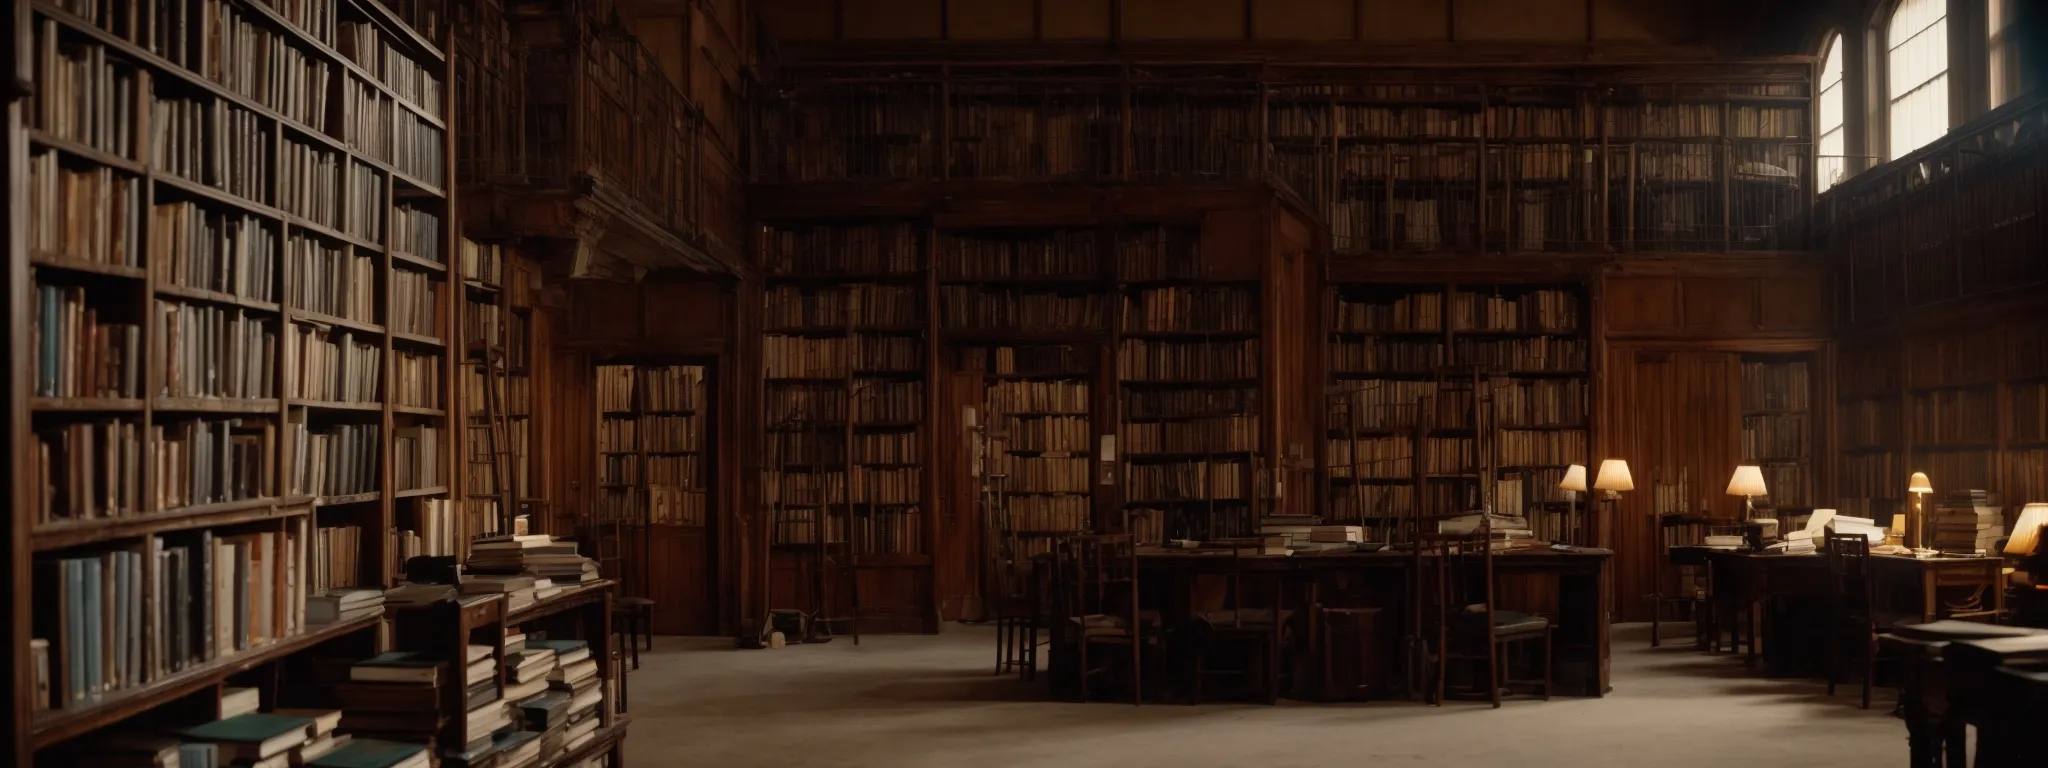 a dusty, cobweb-laden library with untouched, yellowing books on the shelves.